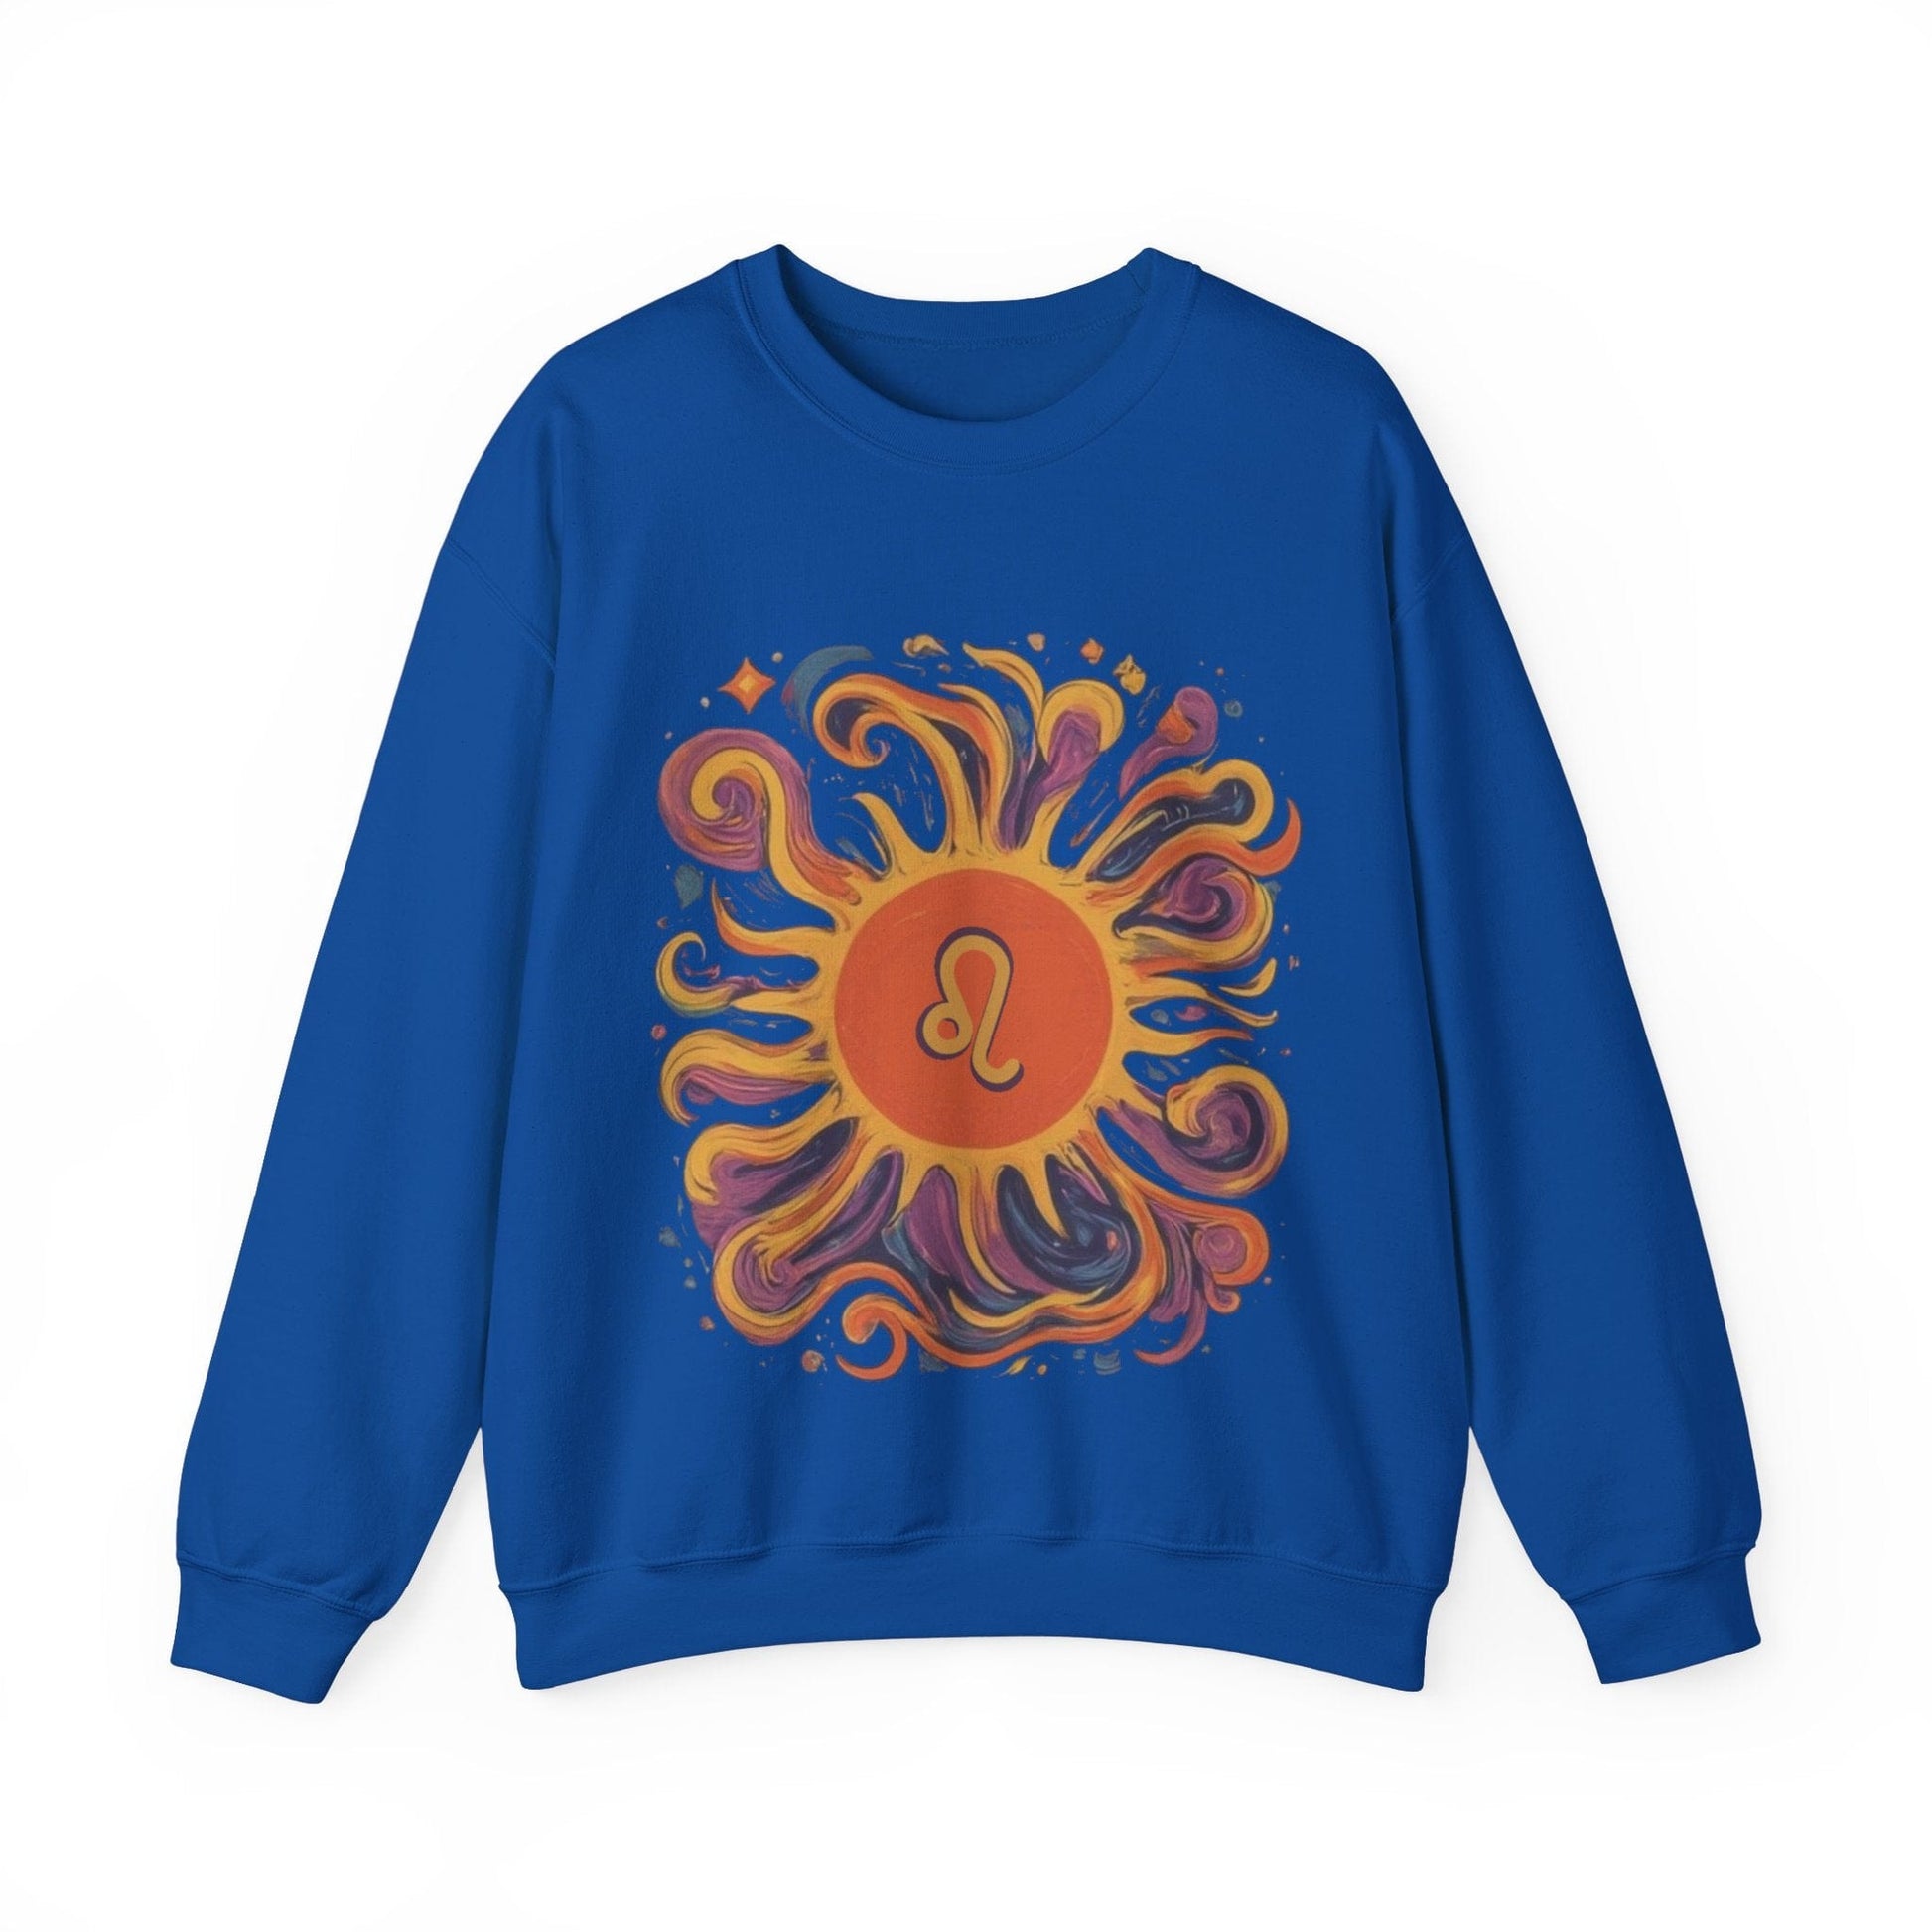 Sweatshirt S / Royal Leo Majestic Sun Soft Sweater: Royal Warmth for the Lion's Heart